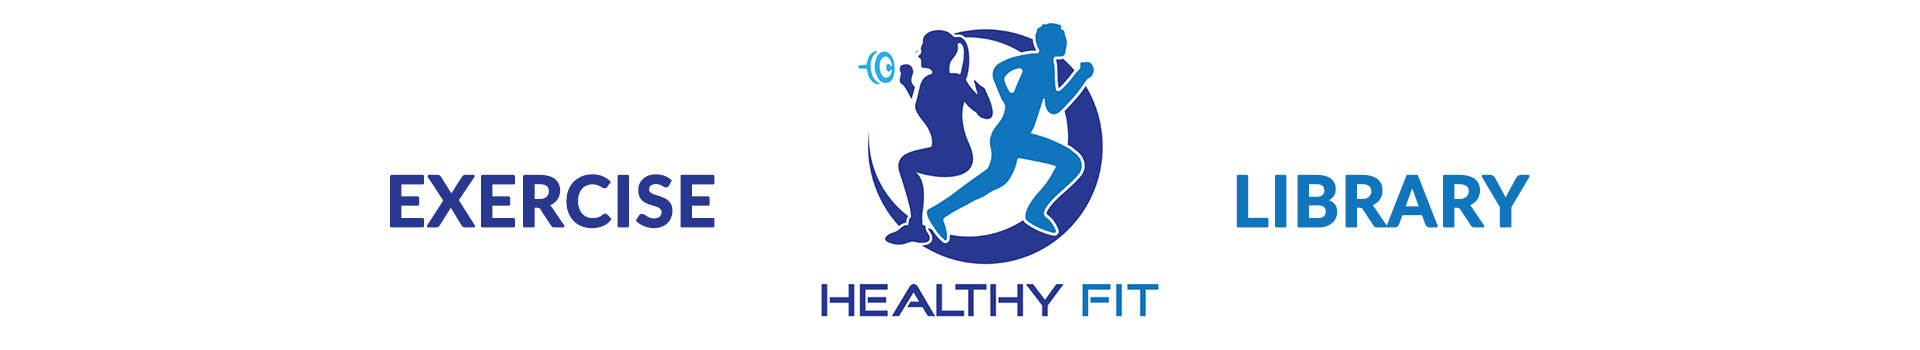 Healthy Fit Exercise Library